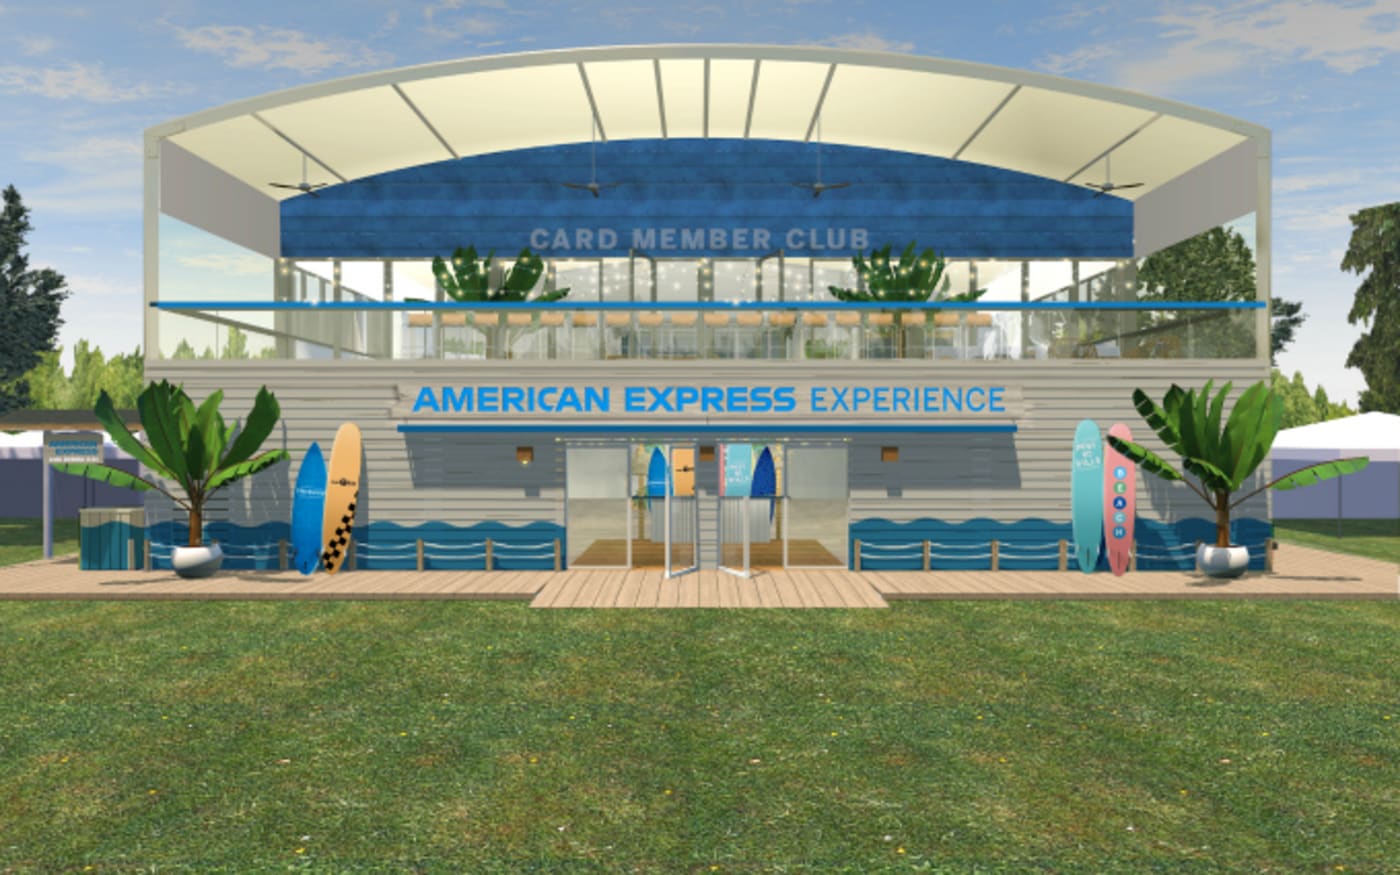 American Express Partners With Panorama to Bring Festival-Goers an